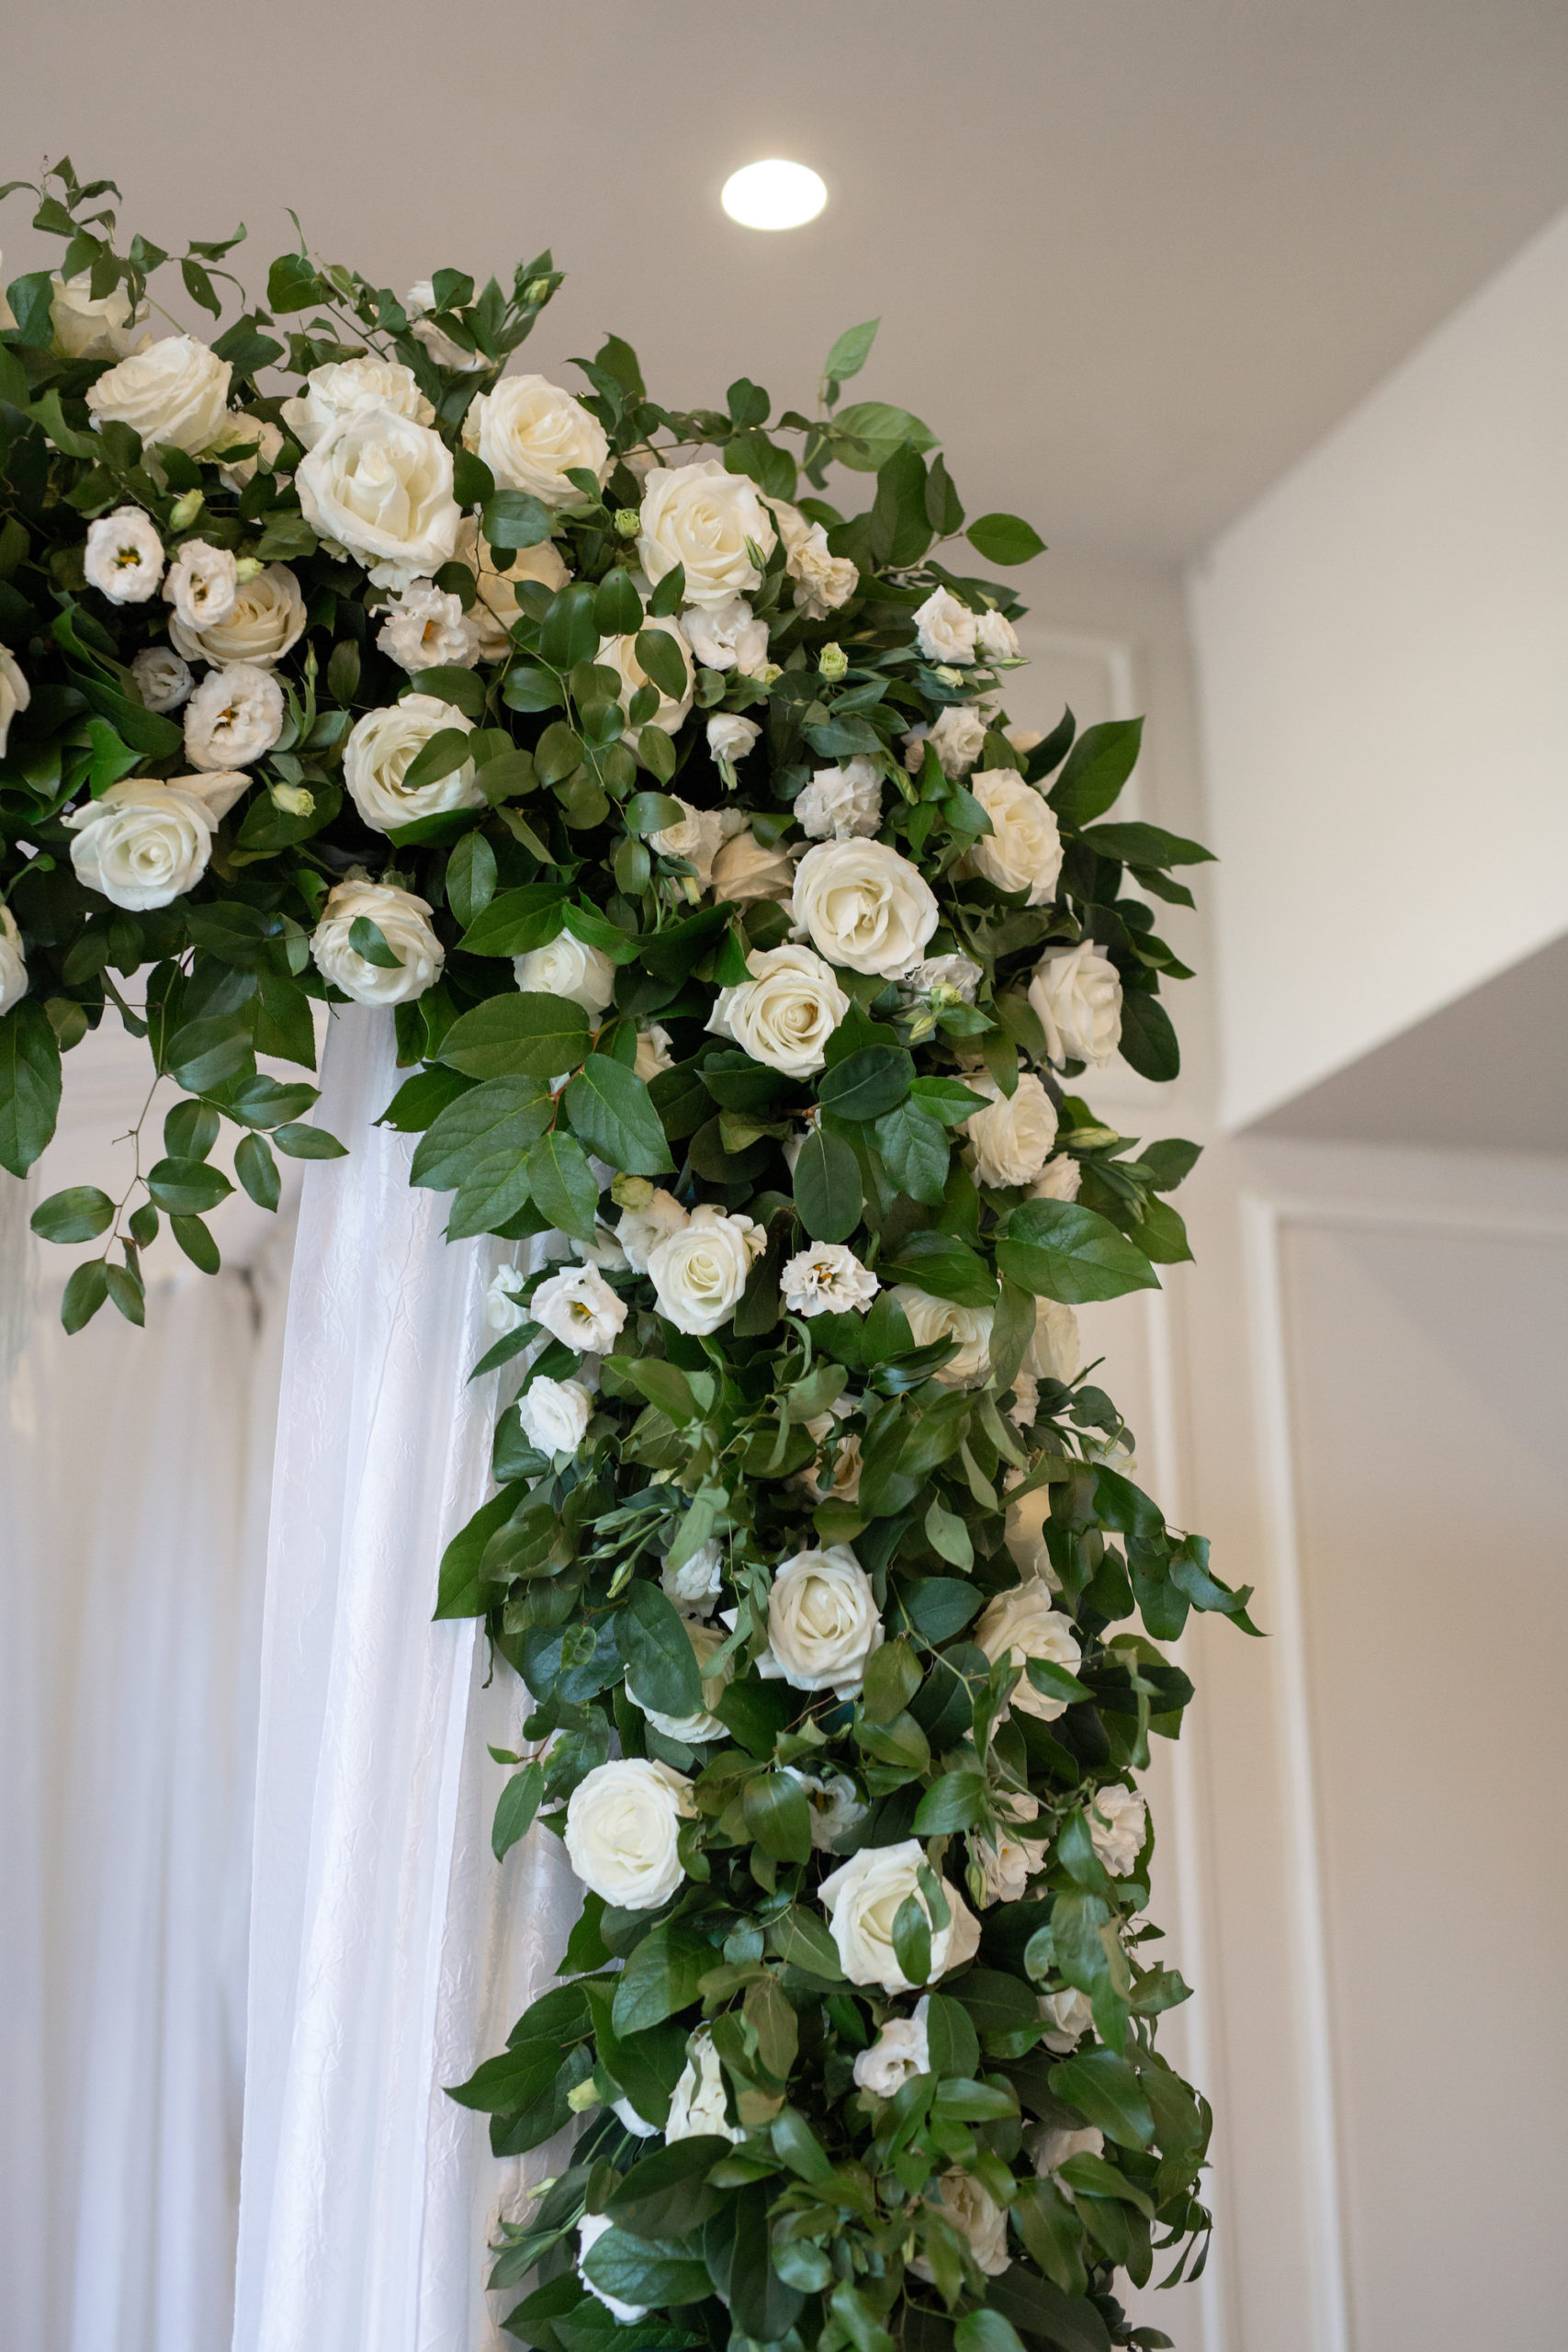 Classic Wedding Ceremony Arch Decor, White Draping with Green Leaves and Ivory Roses | Tampa Bay Wedding Planner UNIQUE Weddings + Events